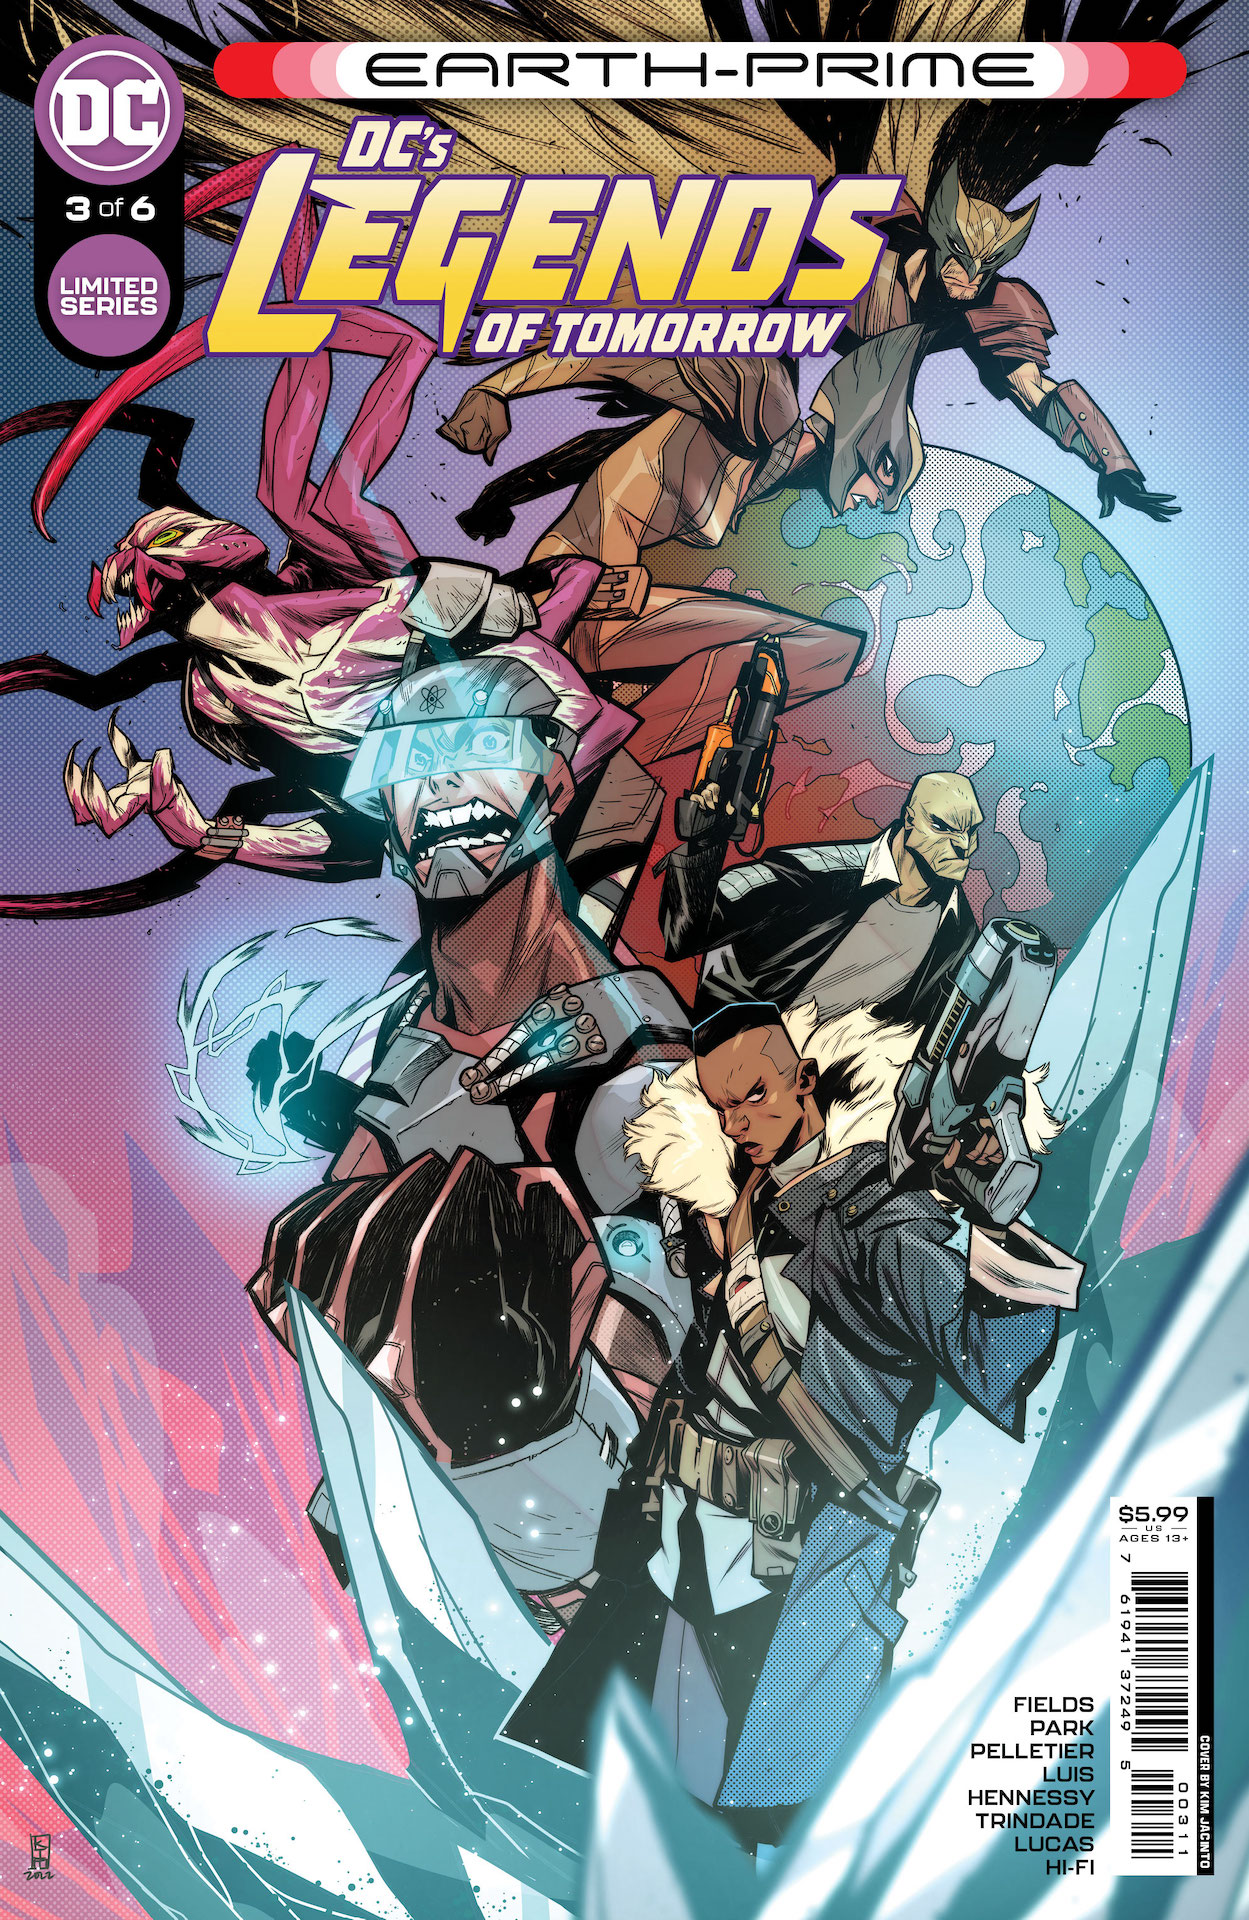 DC Preview: Earth-Prime #3: Legends of Tomorrow